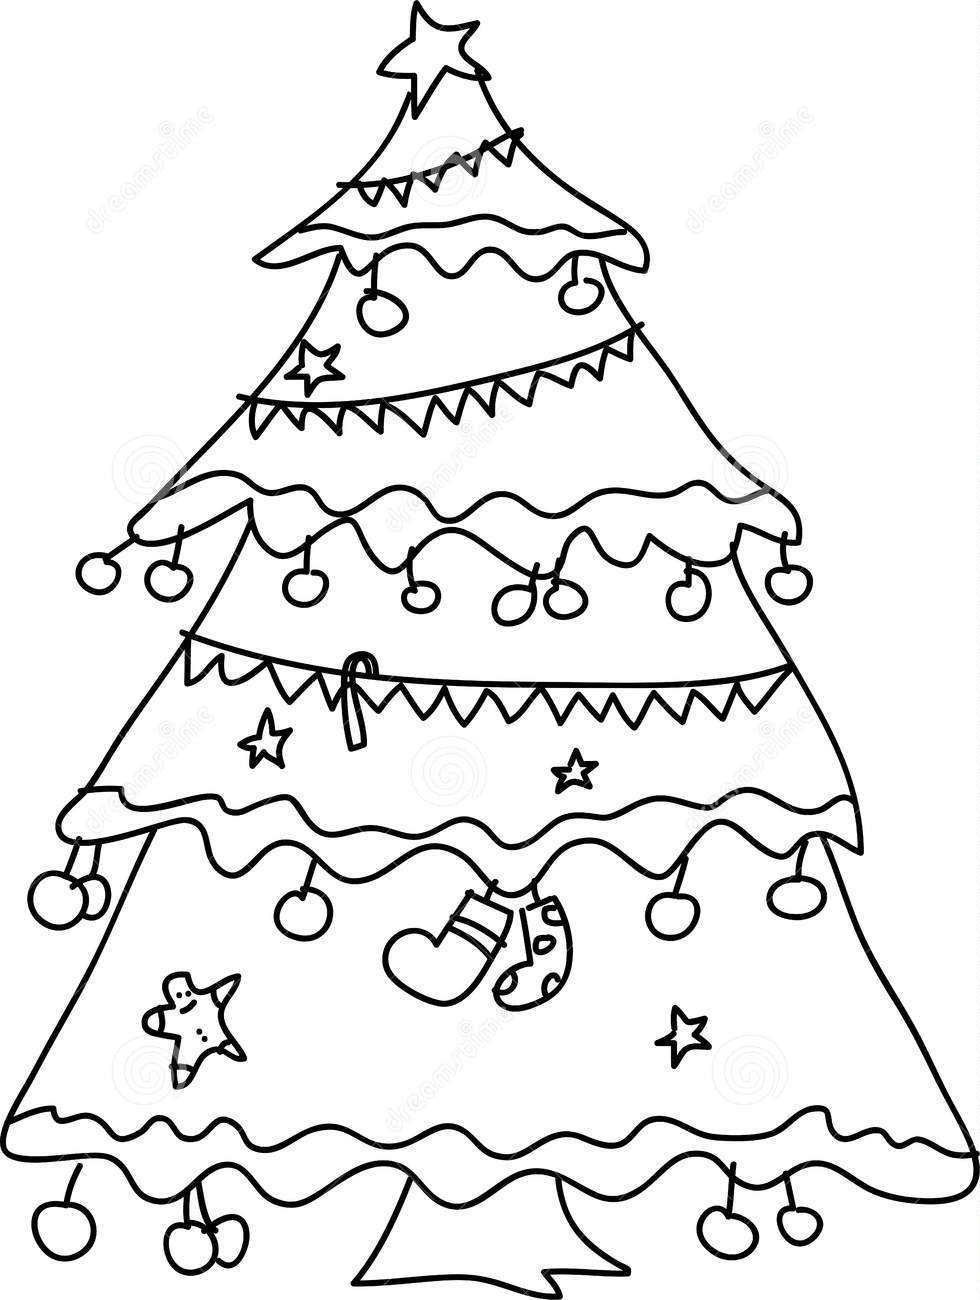 Templates of New Year's Christmas trees for drawing on the wall, example 2